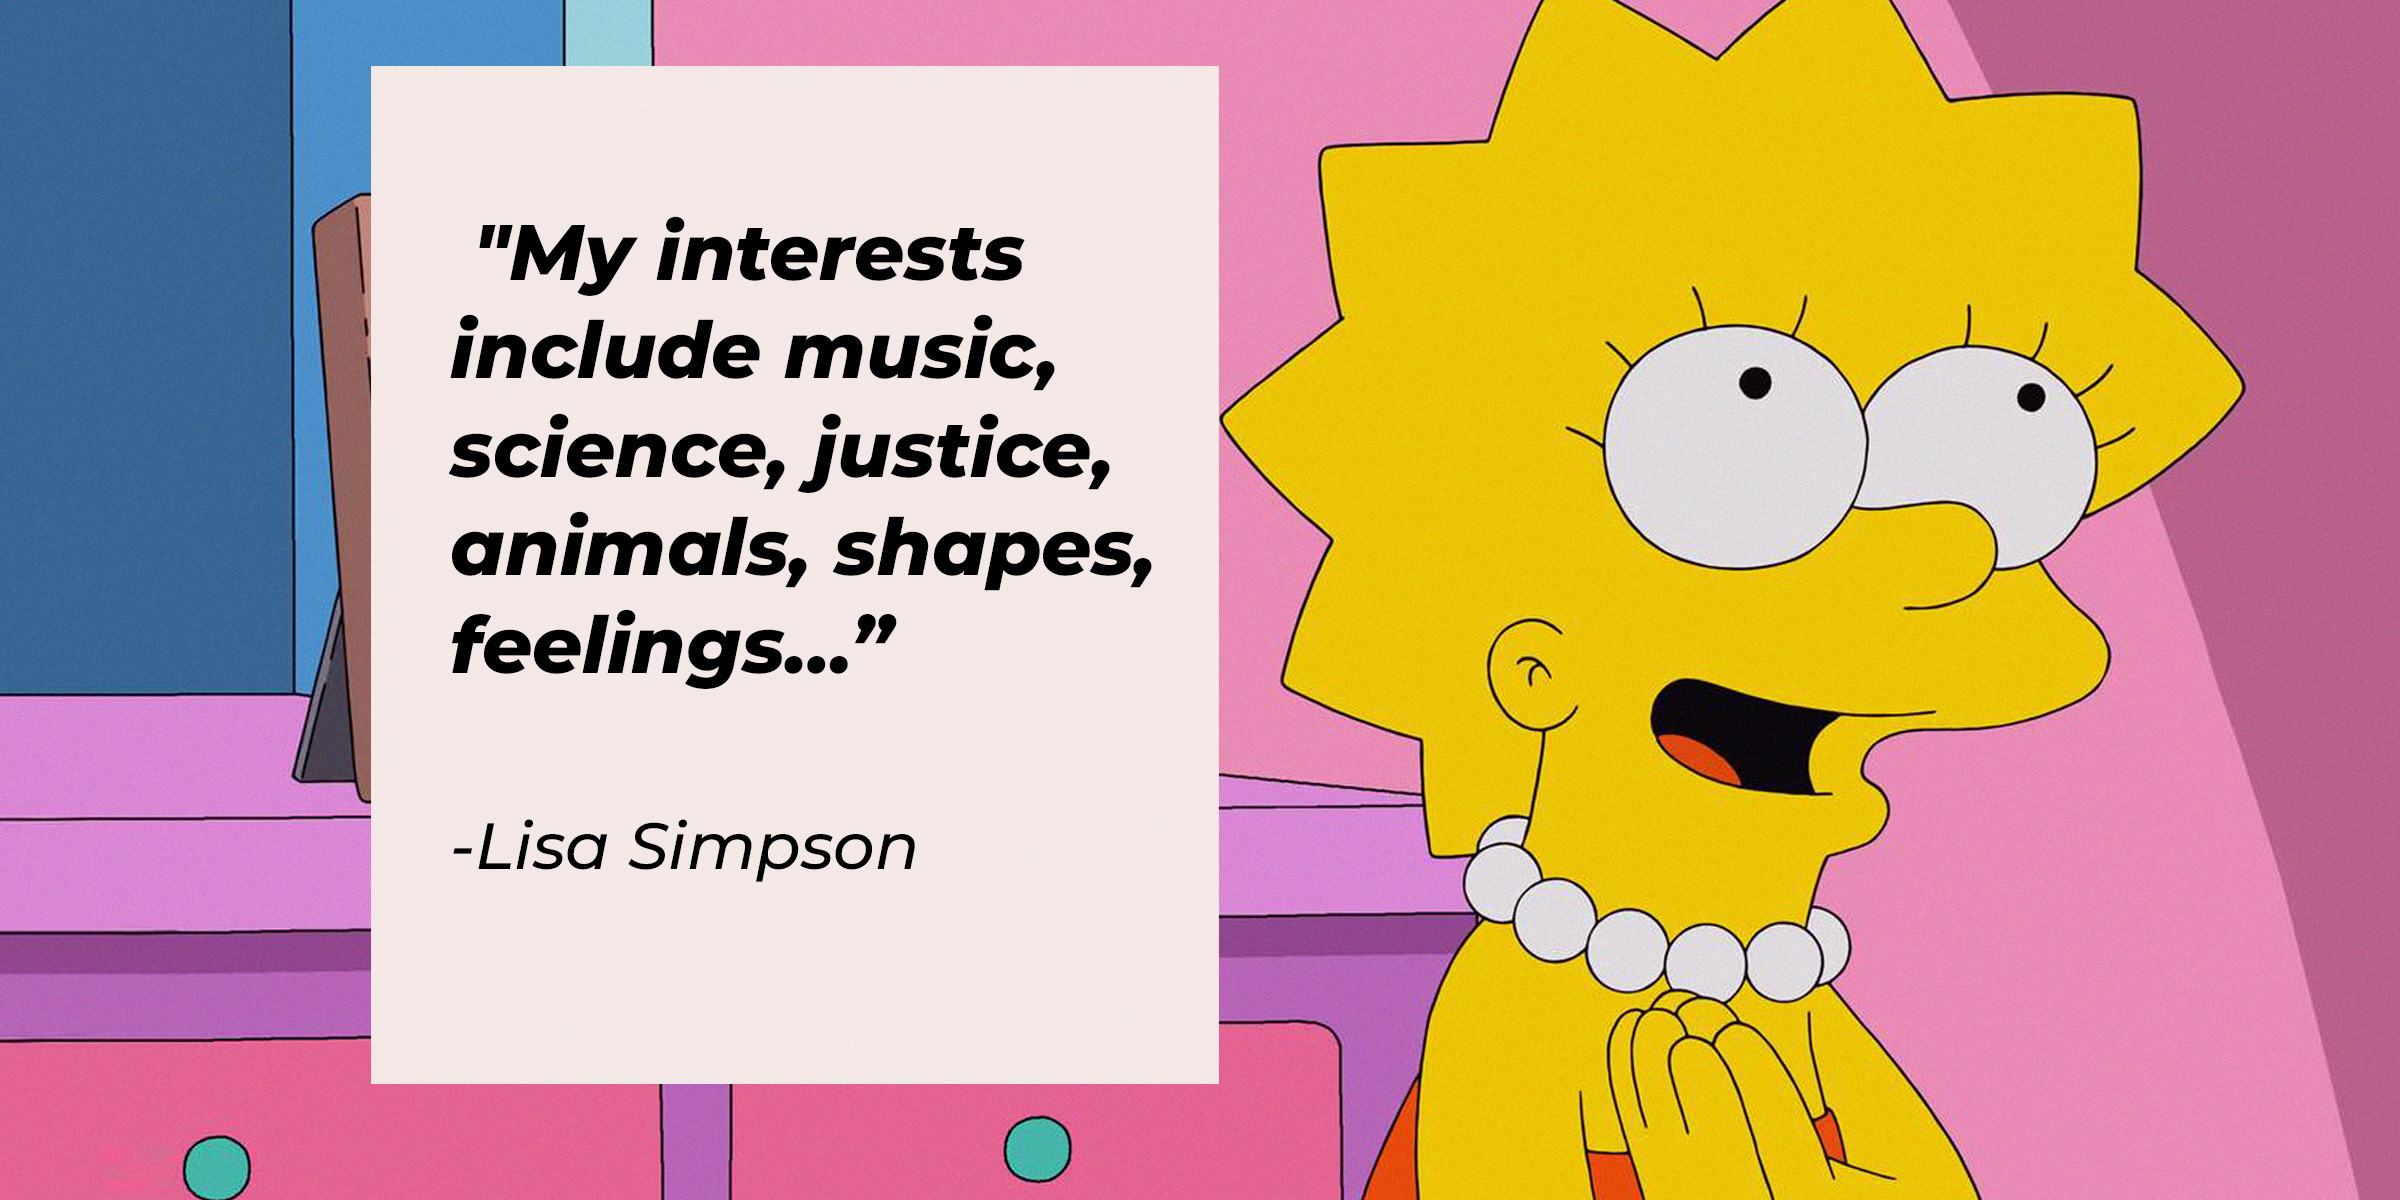 Lisa Simpson, with her quote: "My interests include music, science, justice, animals, shapes, feelings…” | Source: facebook.com/TheSimpsons